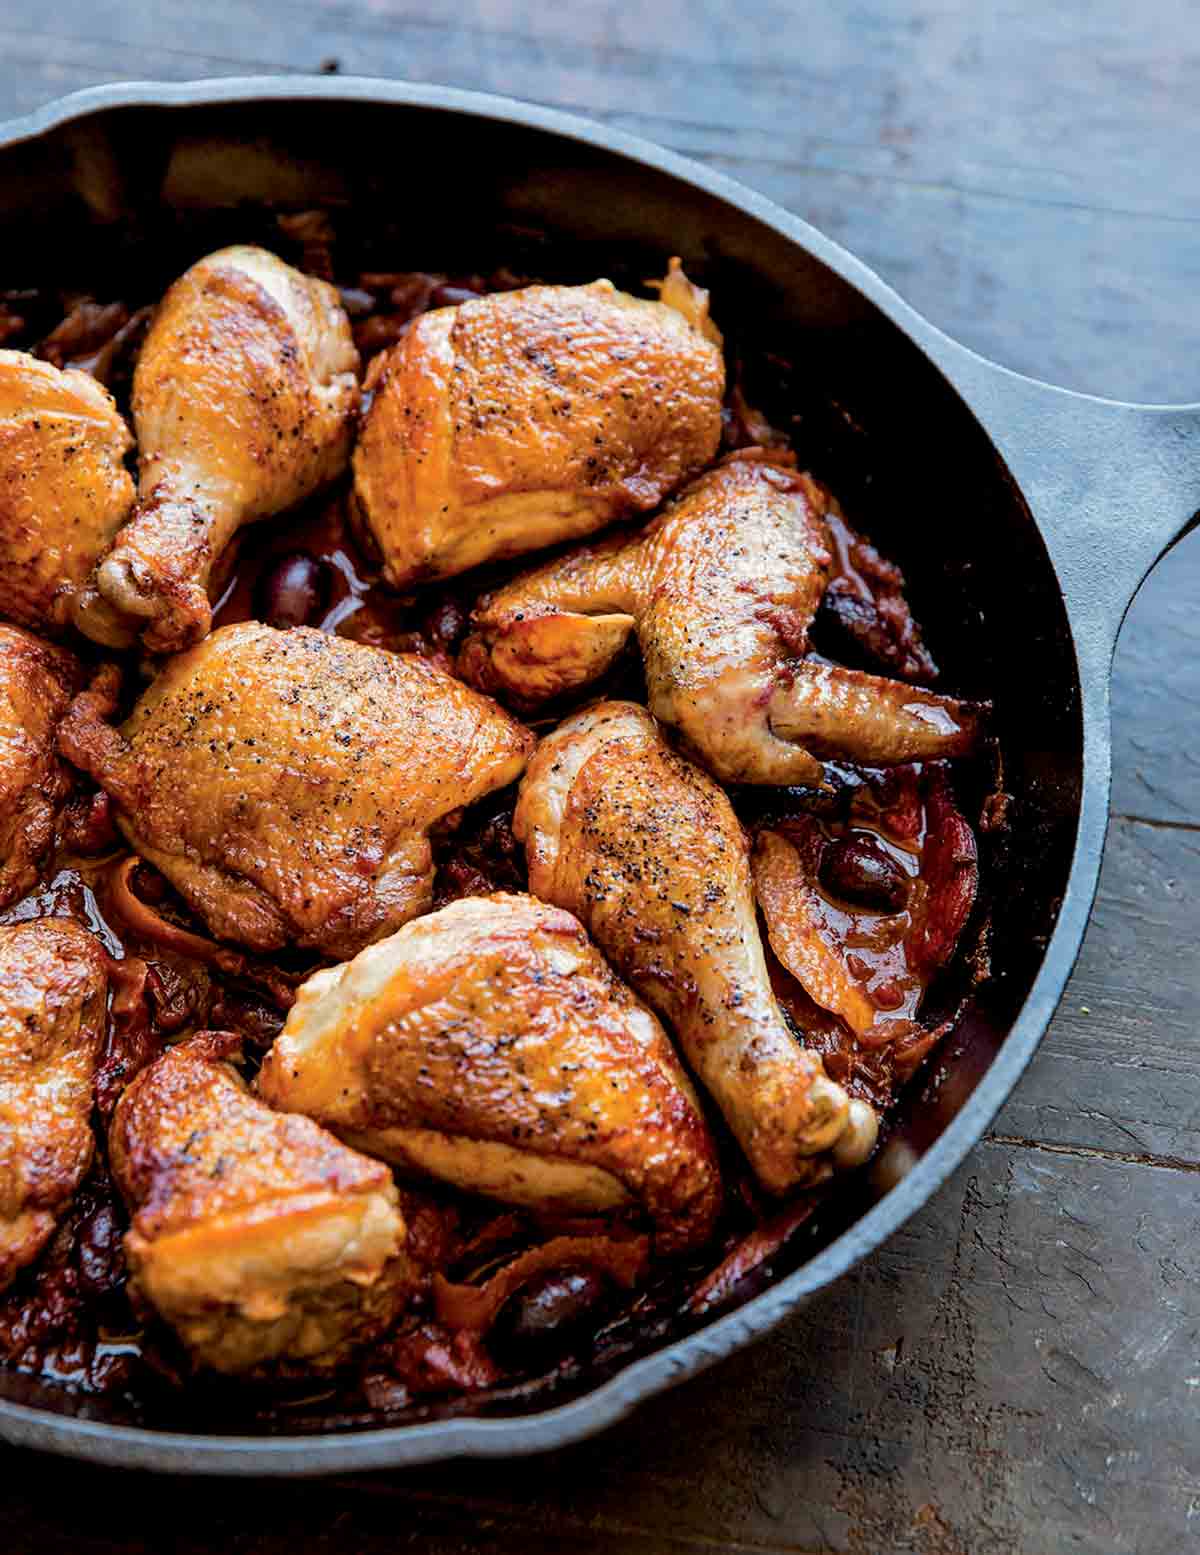 Braised chicken with olives and orange in a cast-iron skillet on a wooden table.